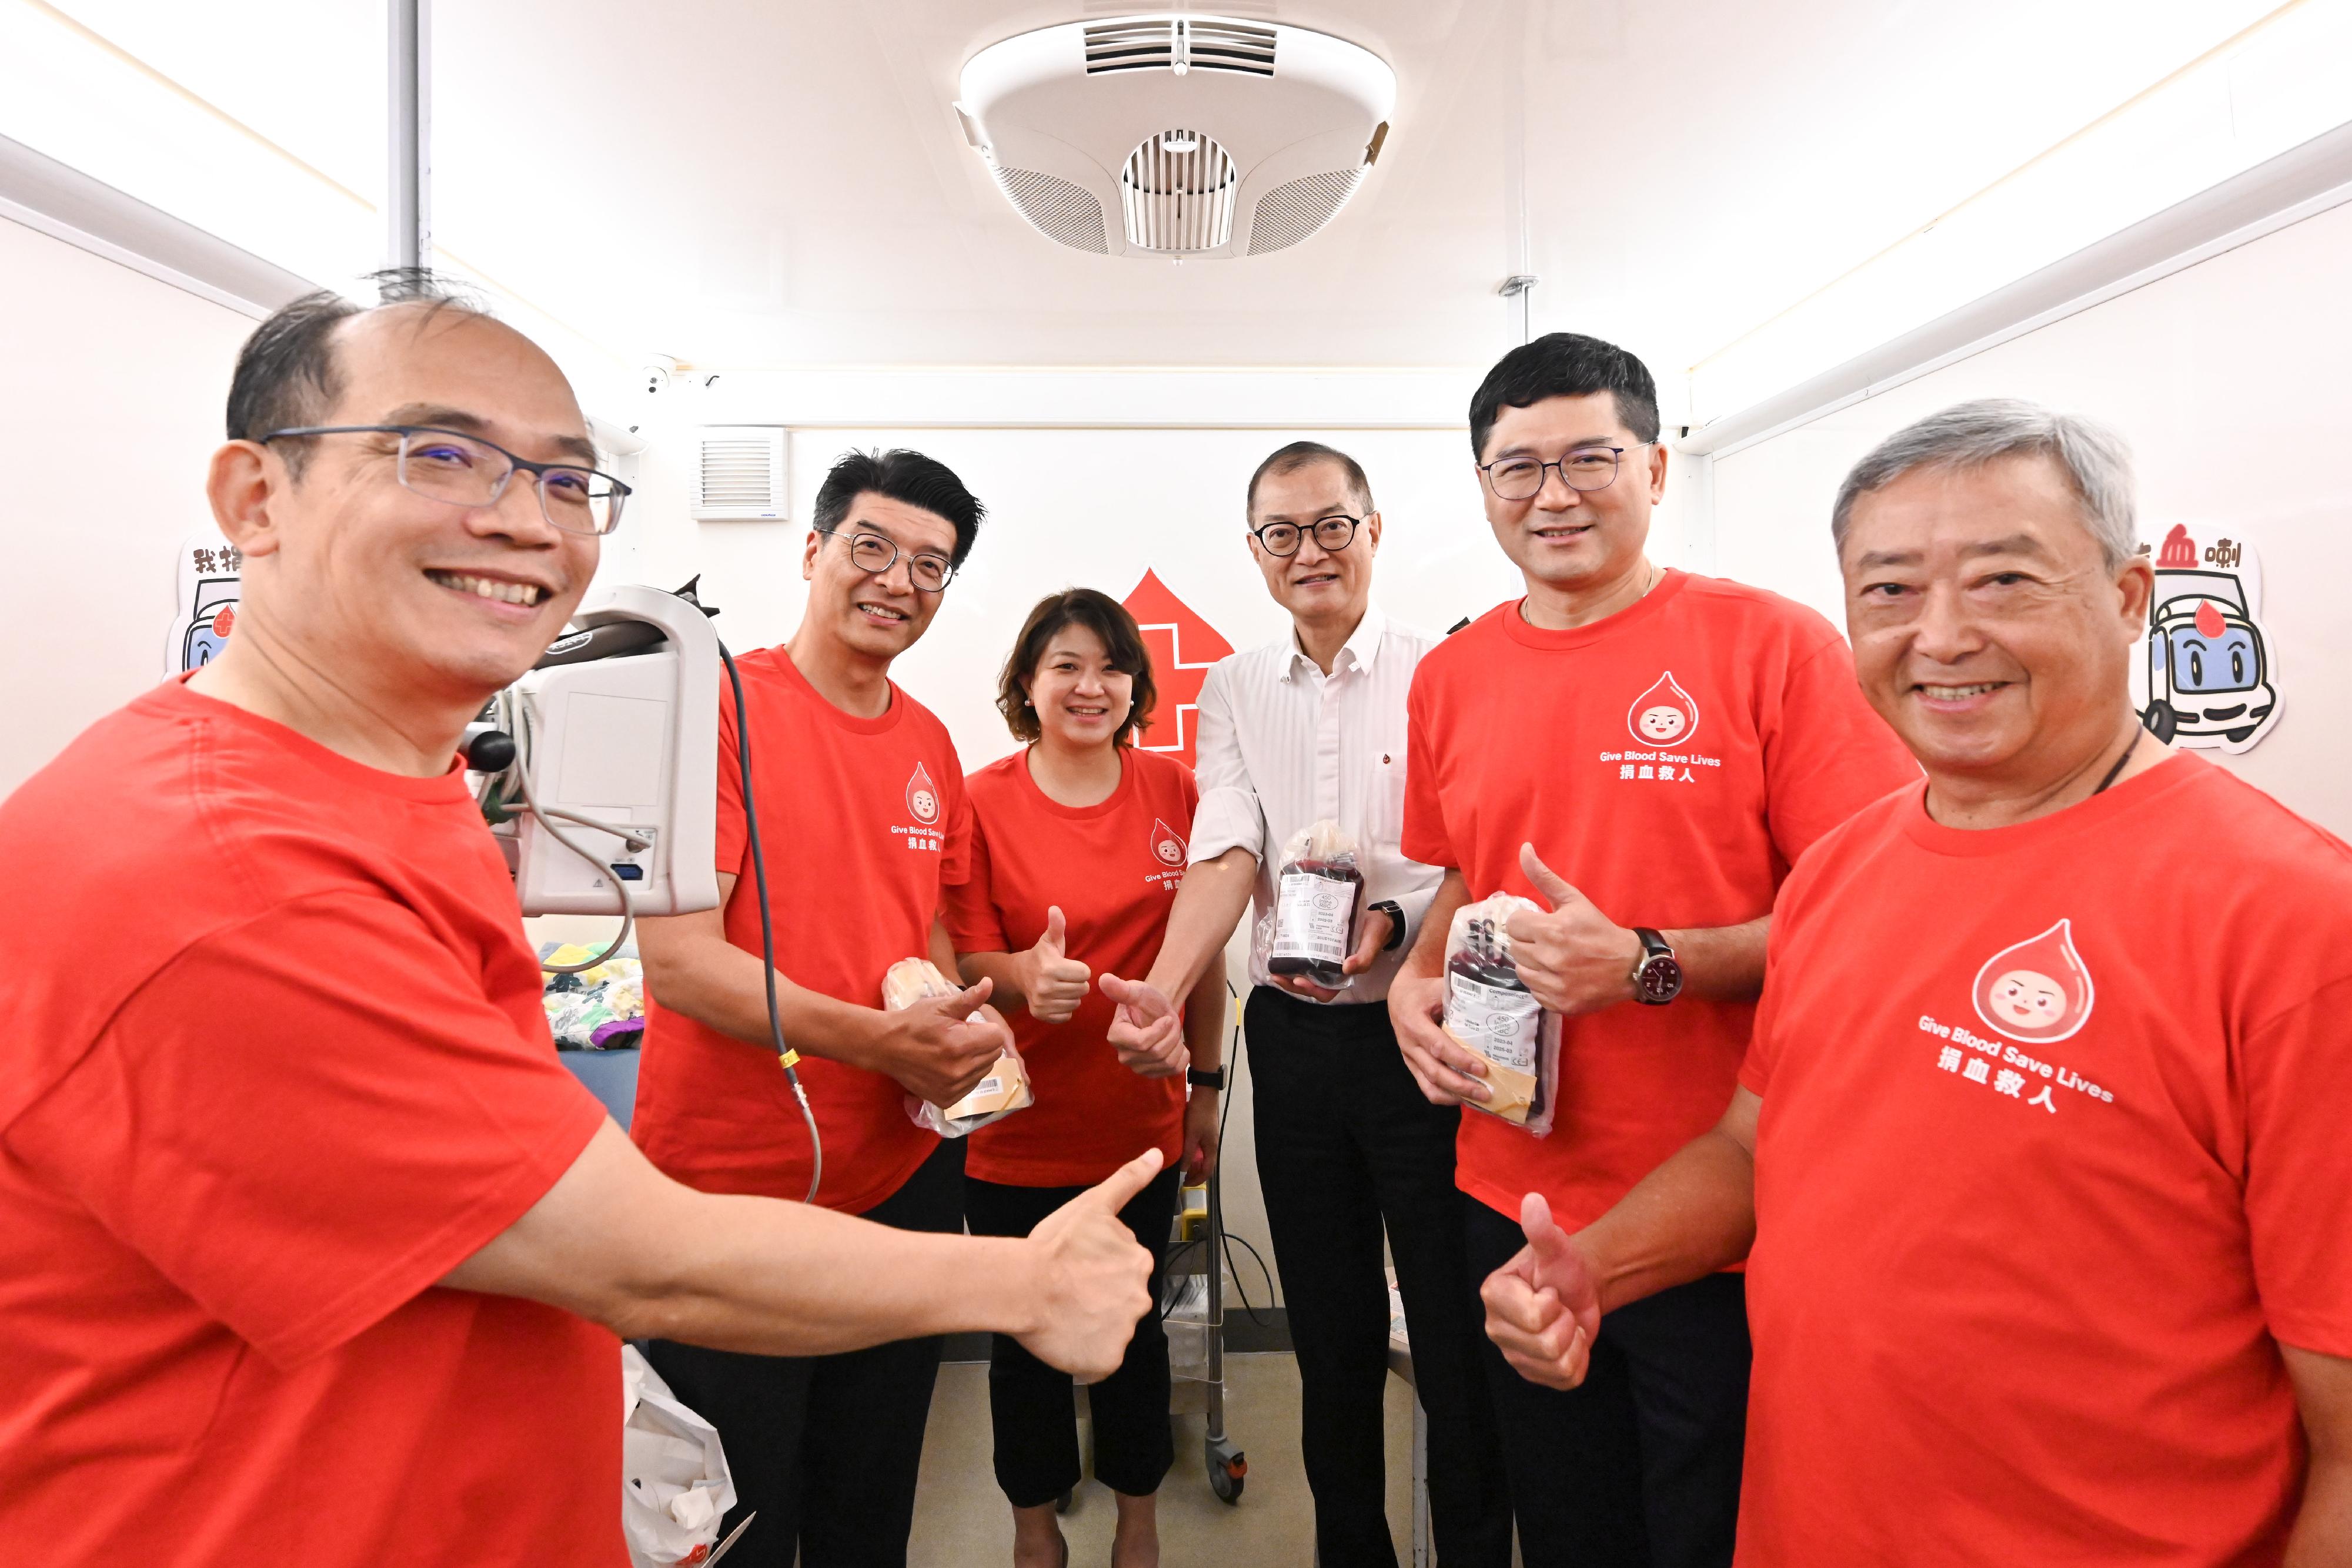 The Secretary for Health, Professor Lo Chung-mau (third right); the Under Secretary for Health, Dr Libby Lee (third left); the Commissioner for Primary Healthcare, Dr Pang Fei-chau (second left); and the Chief Executive of the Hospital Authority, Dr Tony Ko (second right), donated blood on the mobile blood donation vehicle of the Hong Kong Red Cross Blood Transfusion Service parked at the Central Government Offices today (August 14) to support blood donation drives.

